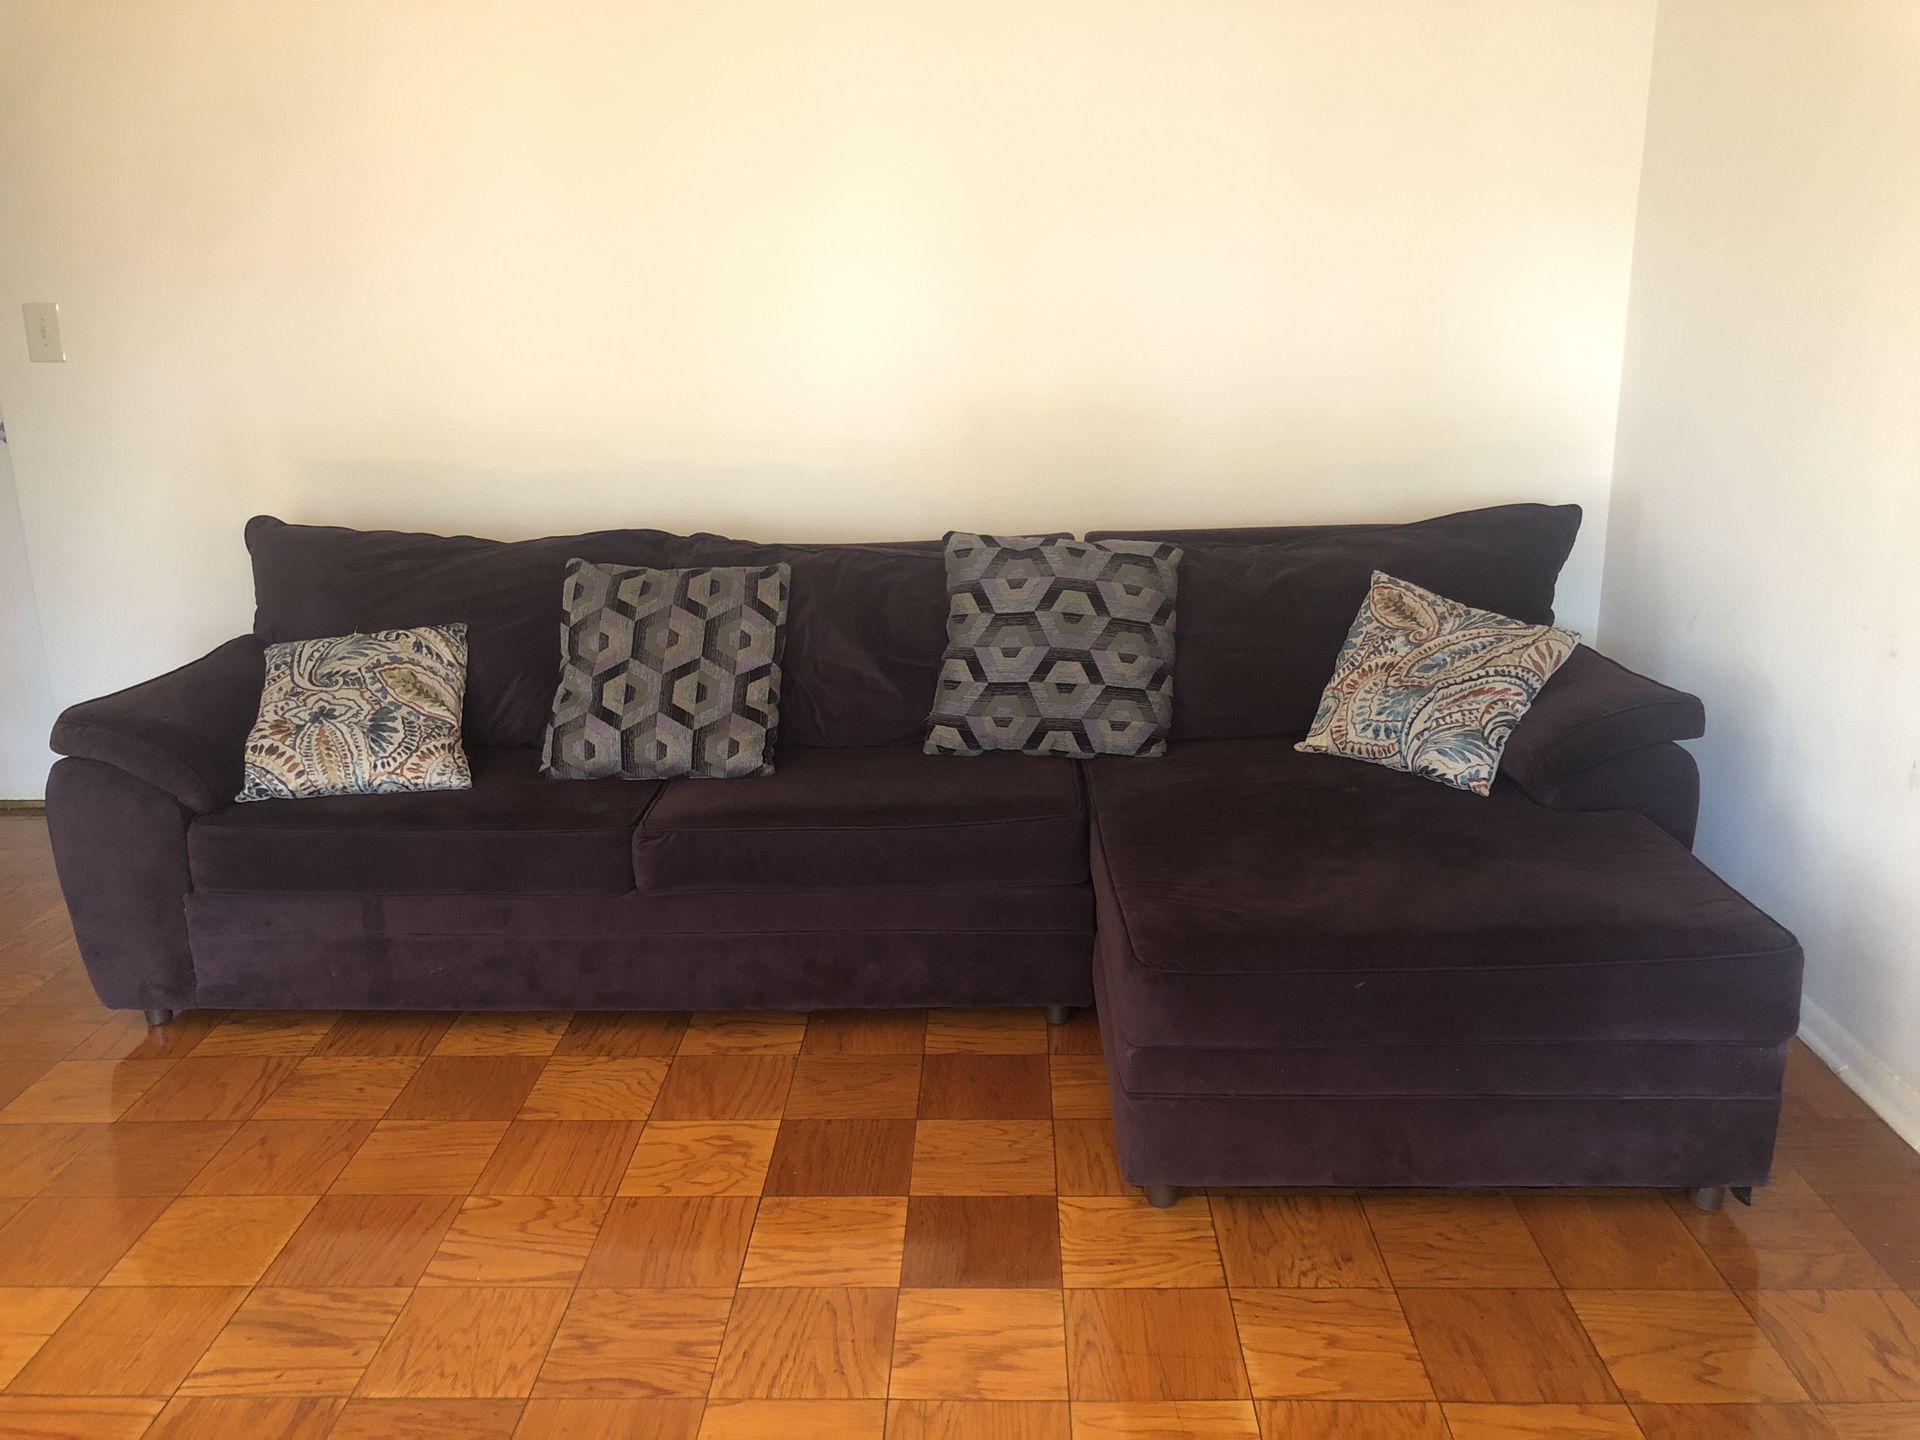 2 Set Couch for sale! L-Sectional, adjustable